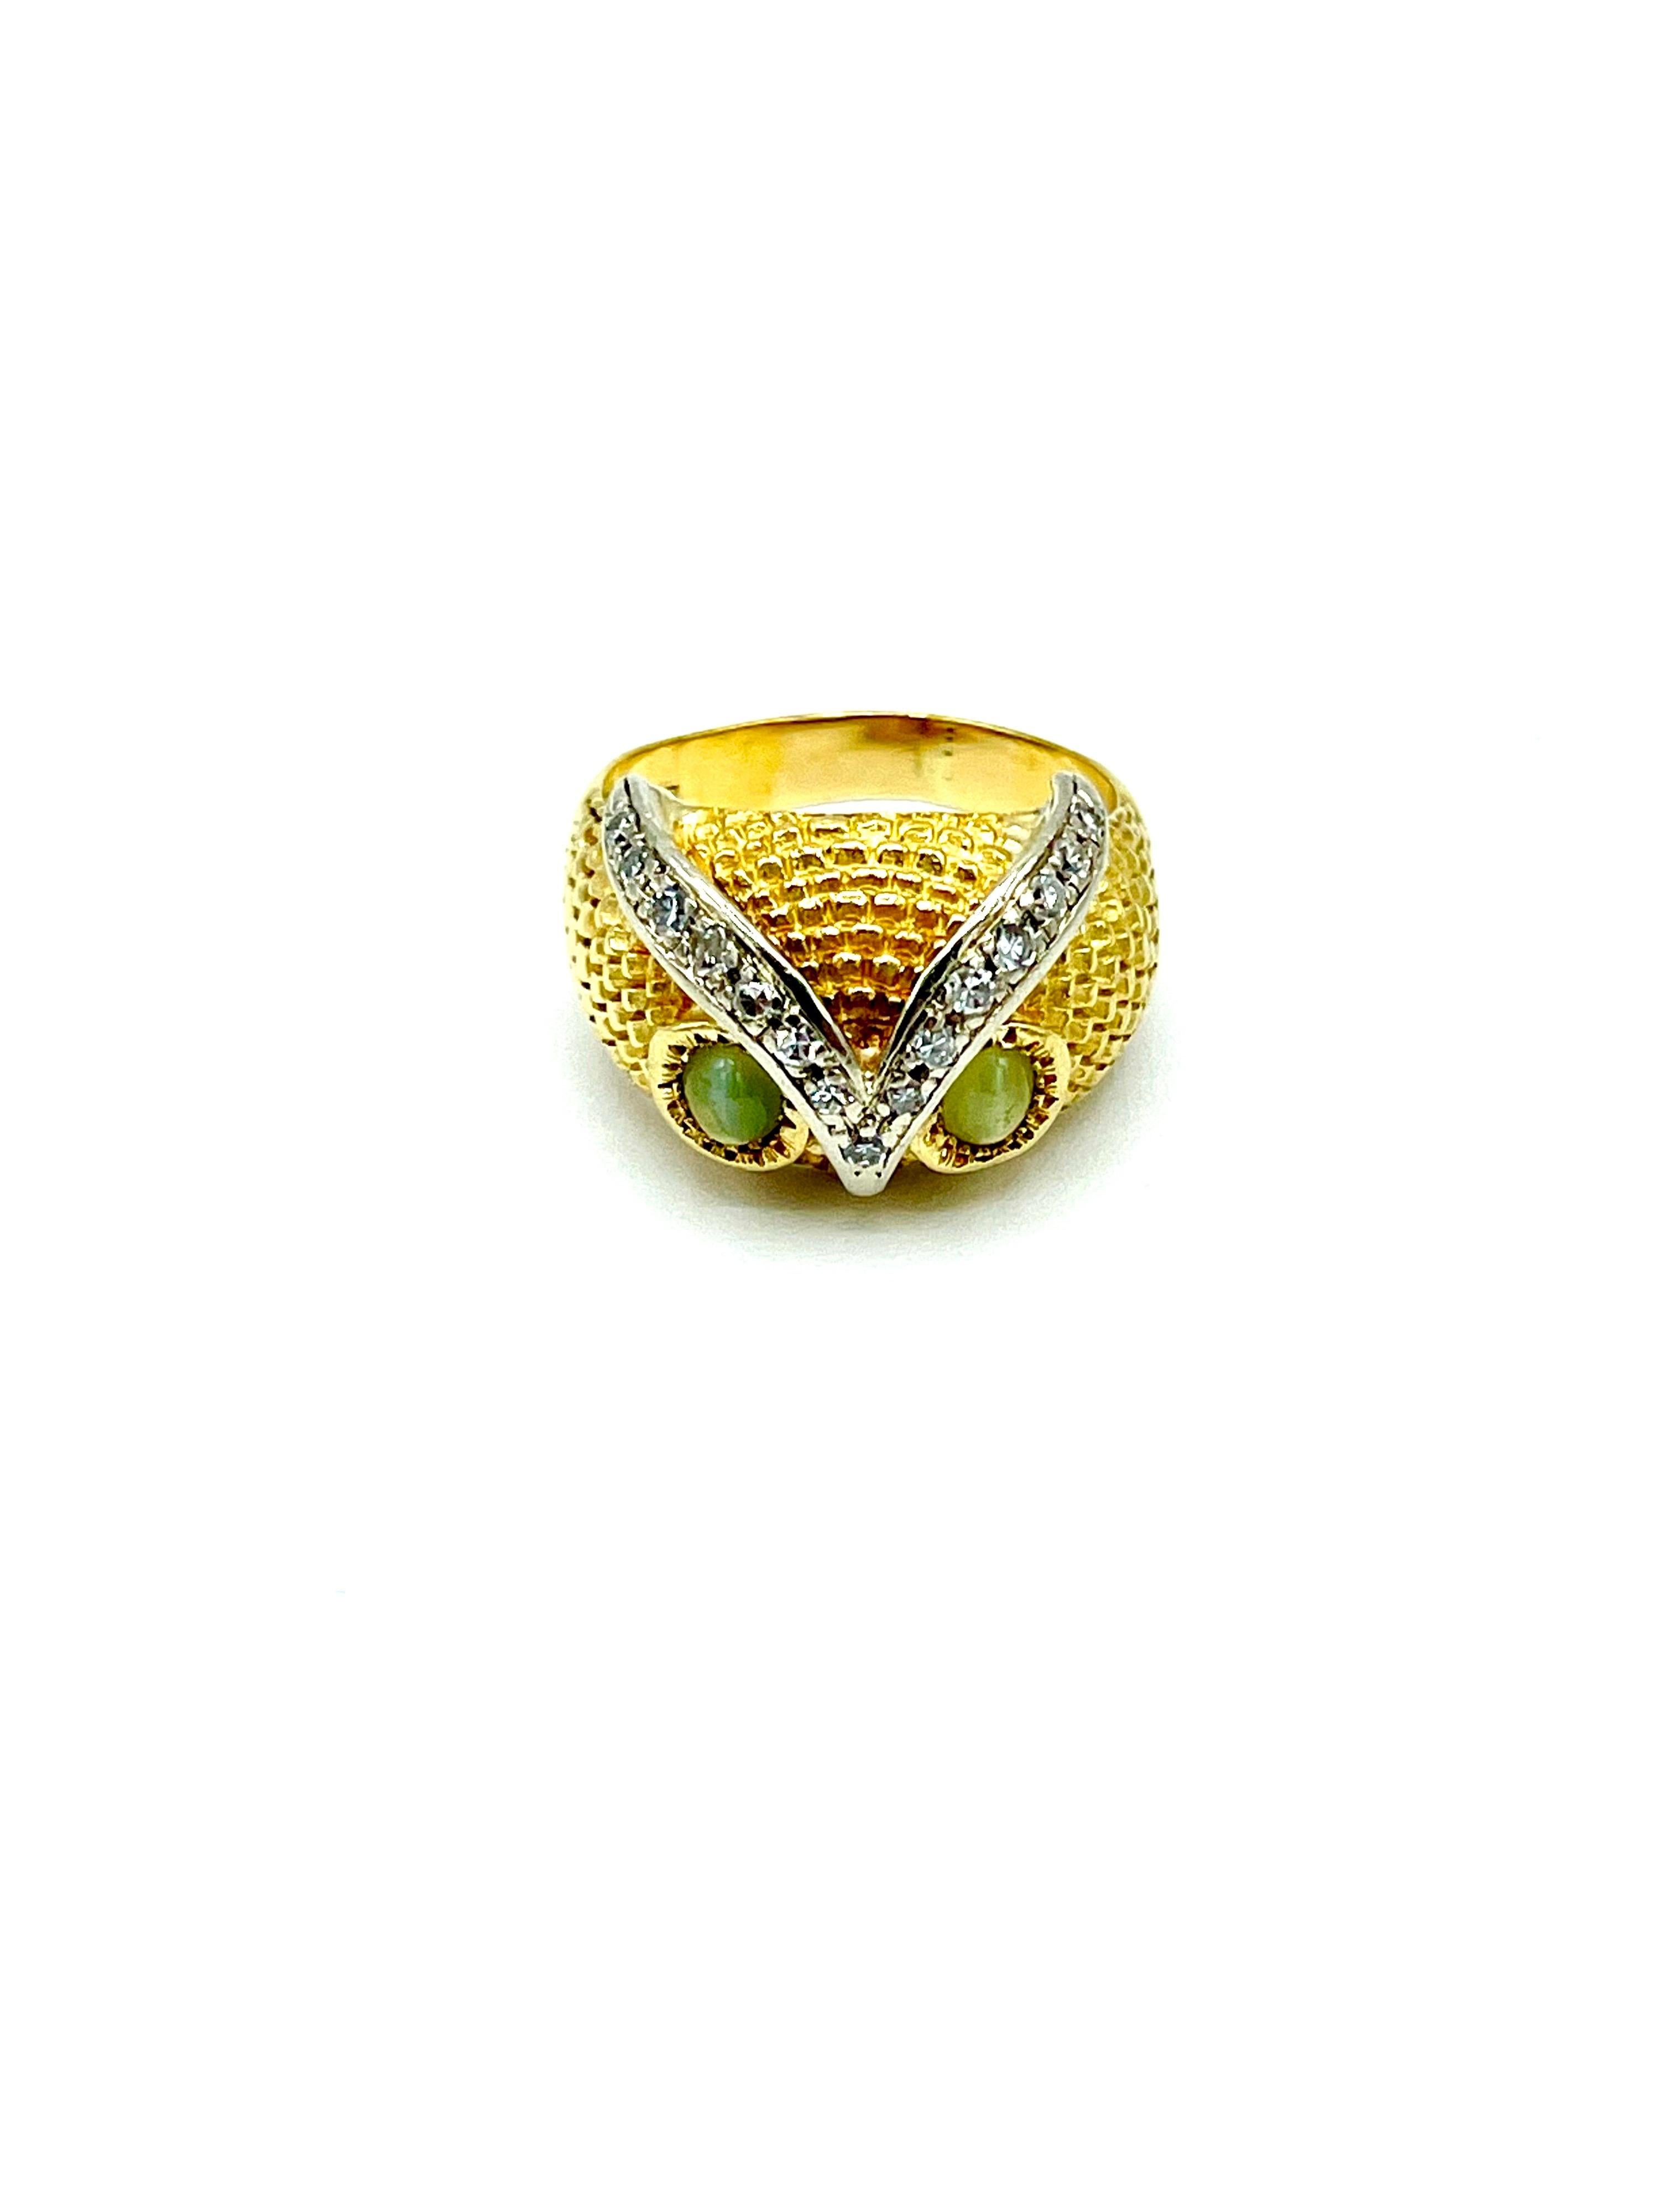 A very unique cocktail ring!  The ring is designed after the majestic owl, featuring cabochon cut Chrysoberyl Cat's Eye eyes, bezel set in 18K yellow gold, with the beak and brow set with round brilliant Diamonds in 18K white gold.  The Chrysoberyl